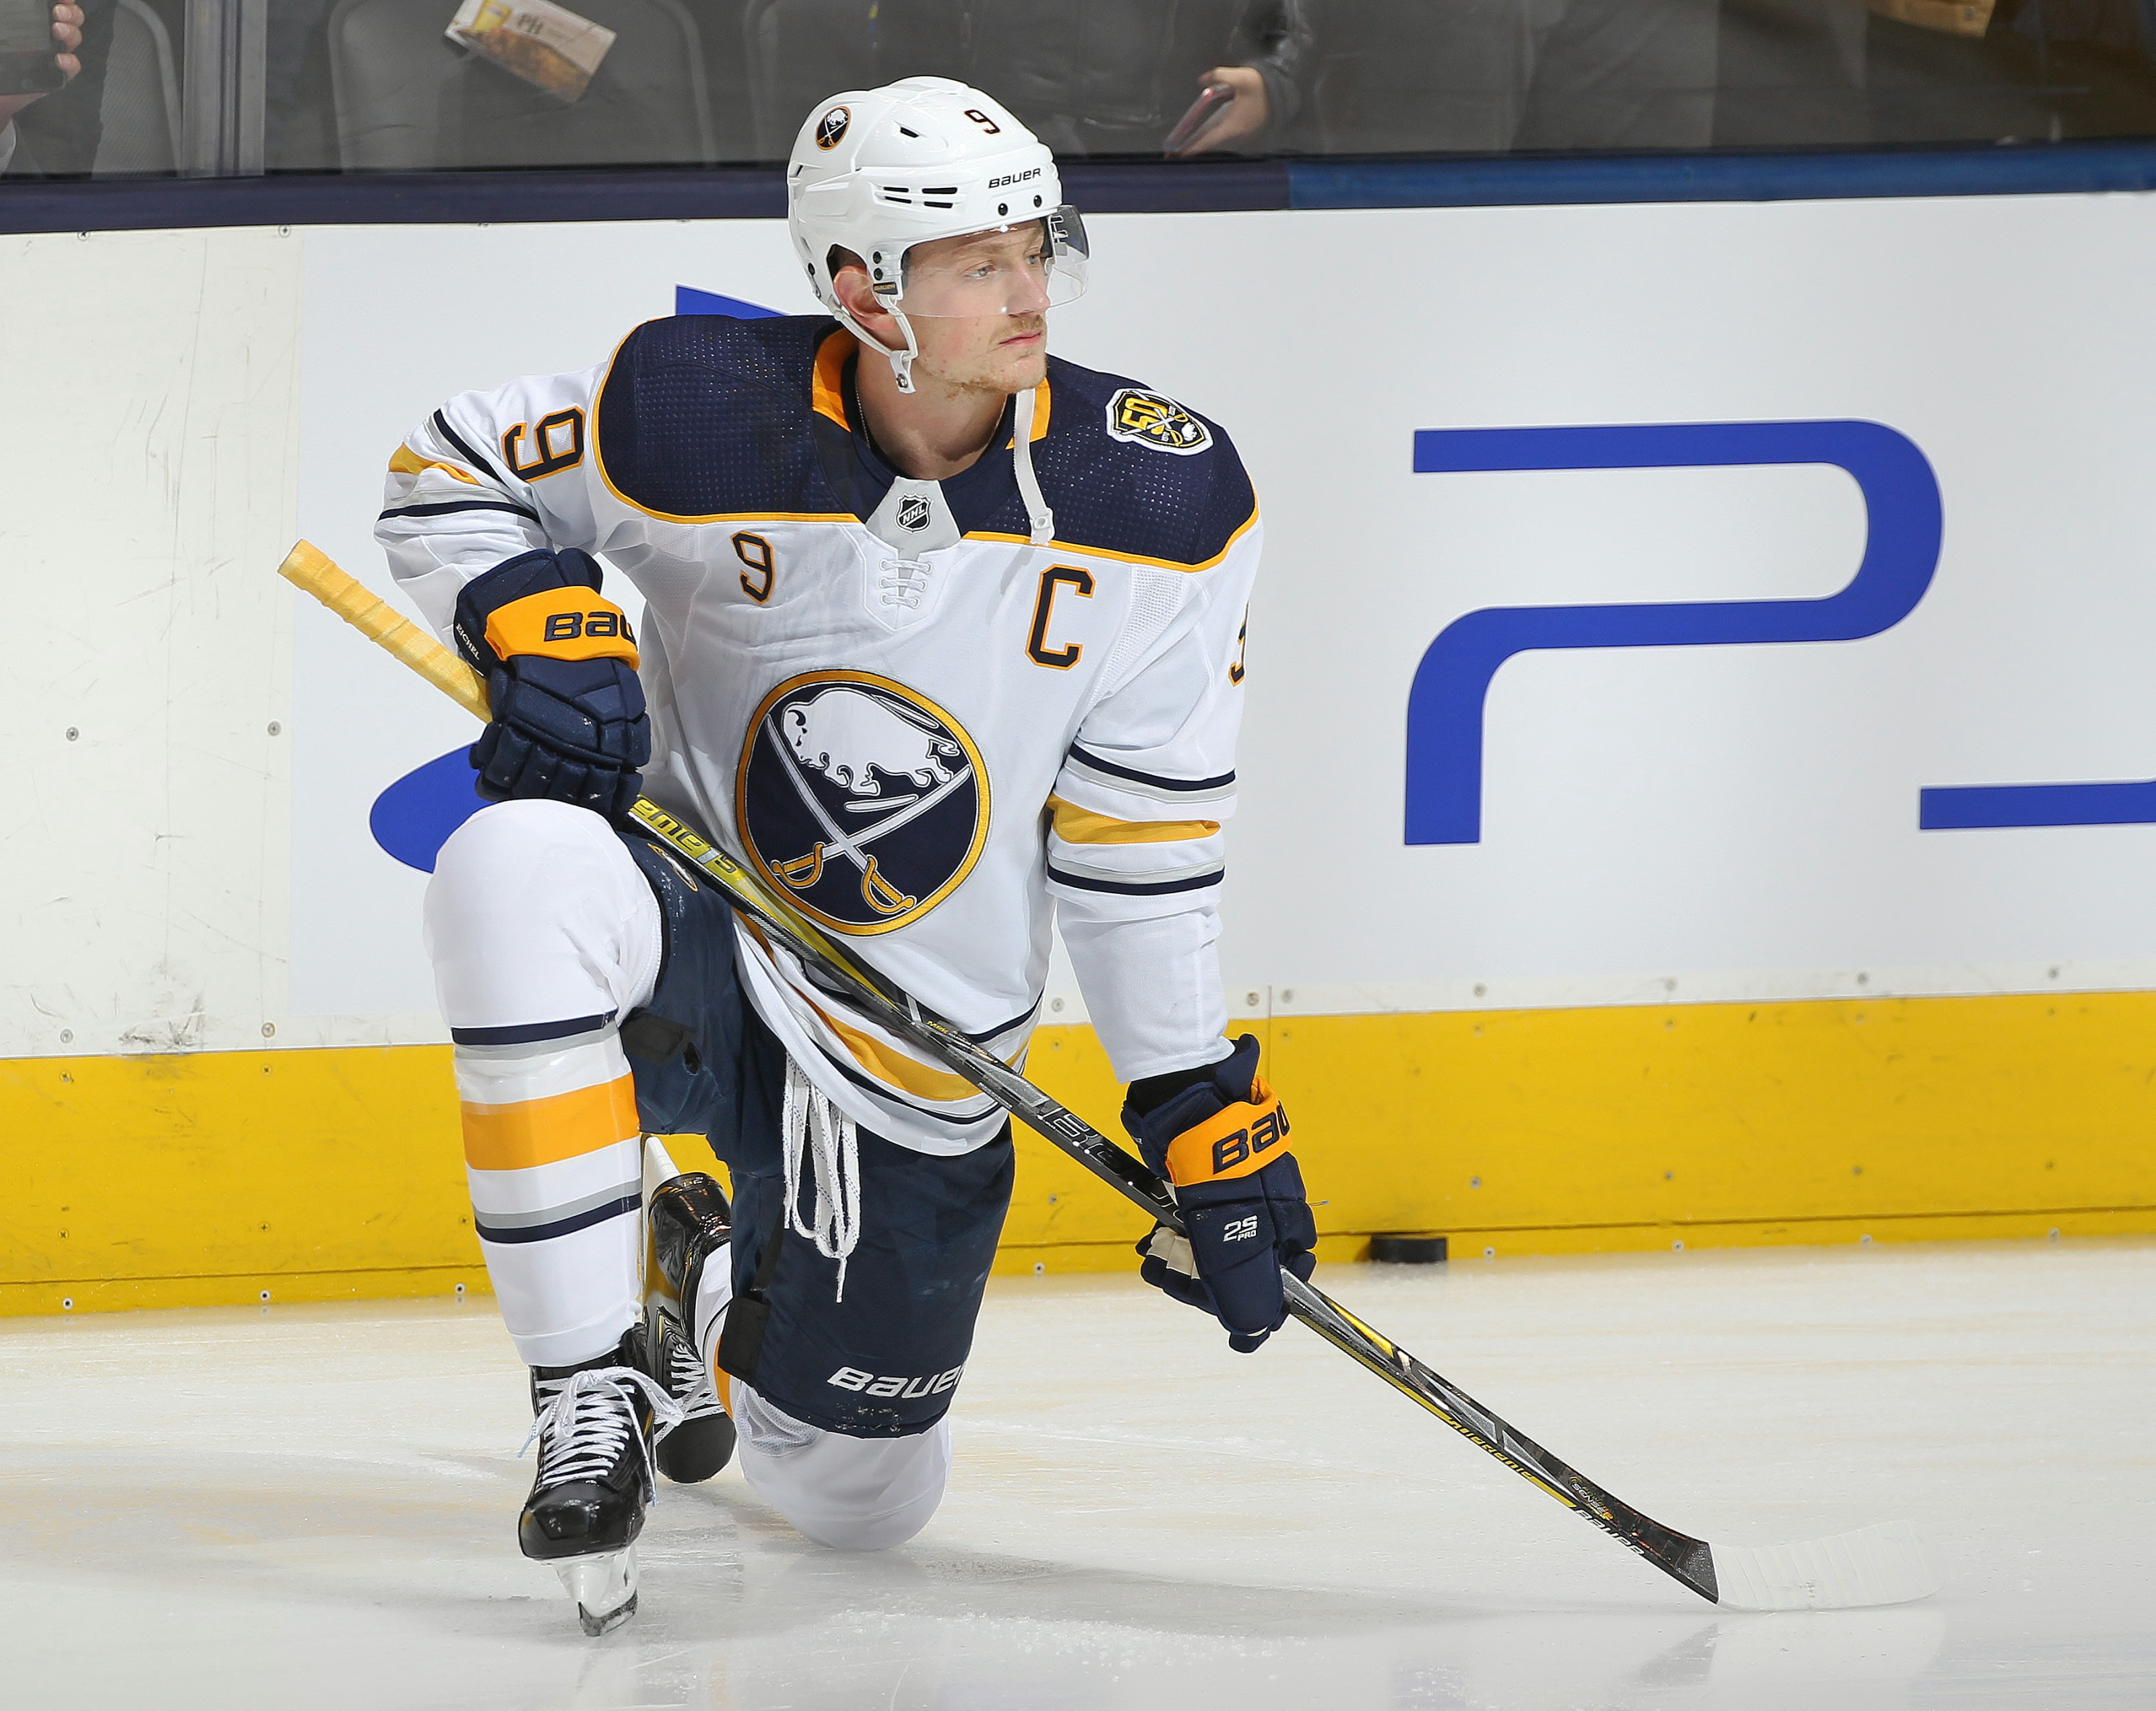 Jack Eichel #9 of the Buffalo Sabres warms up prior to action against the Toronto Maple Leafs.